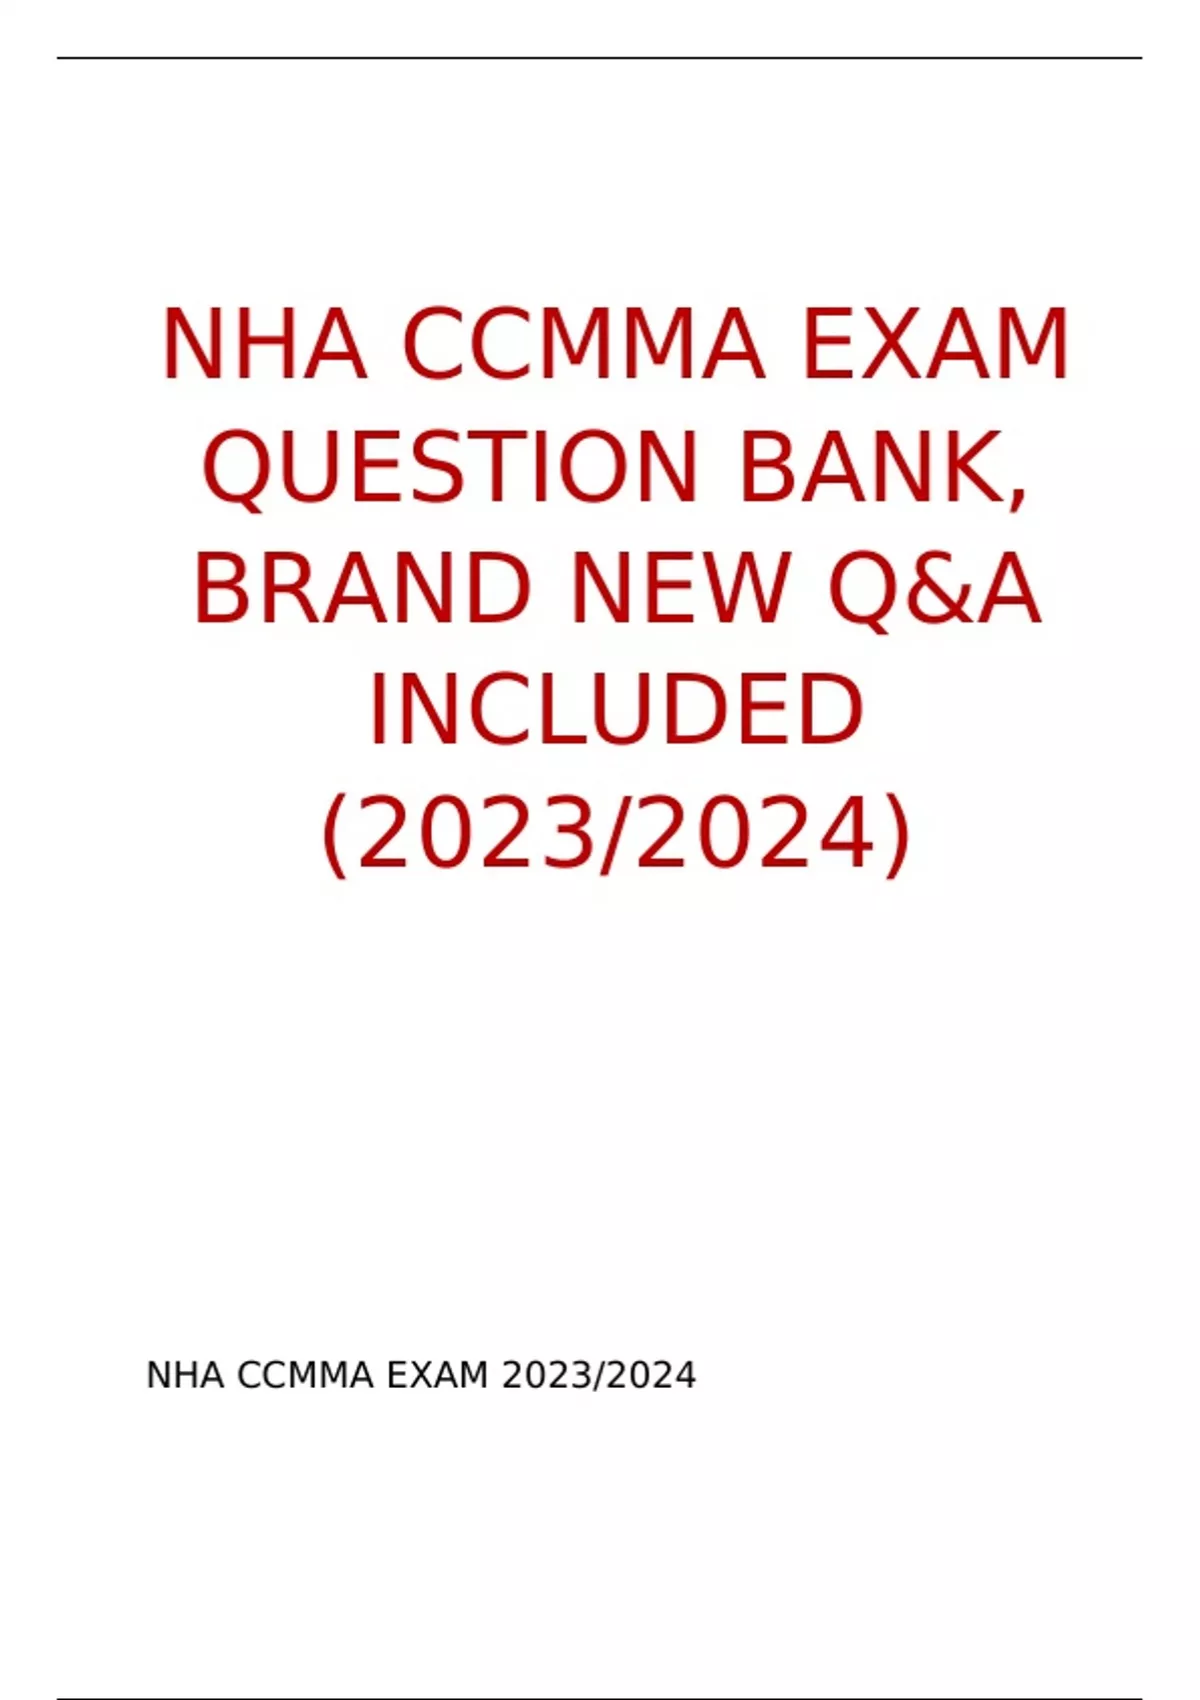 NHA CCMA EXAM QUESTION BANK, BRAND NEW Q&A INCLUDED (20232024) NHA